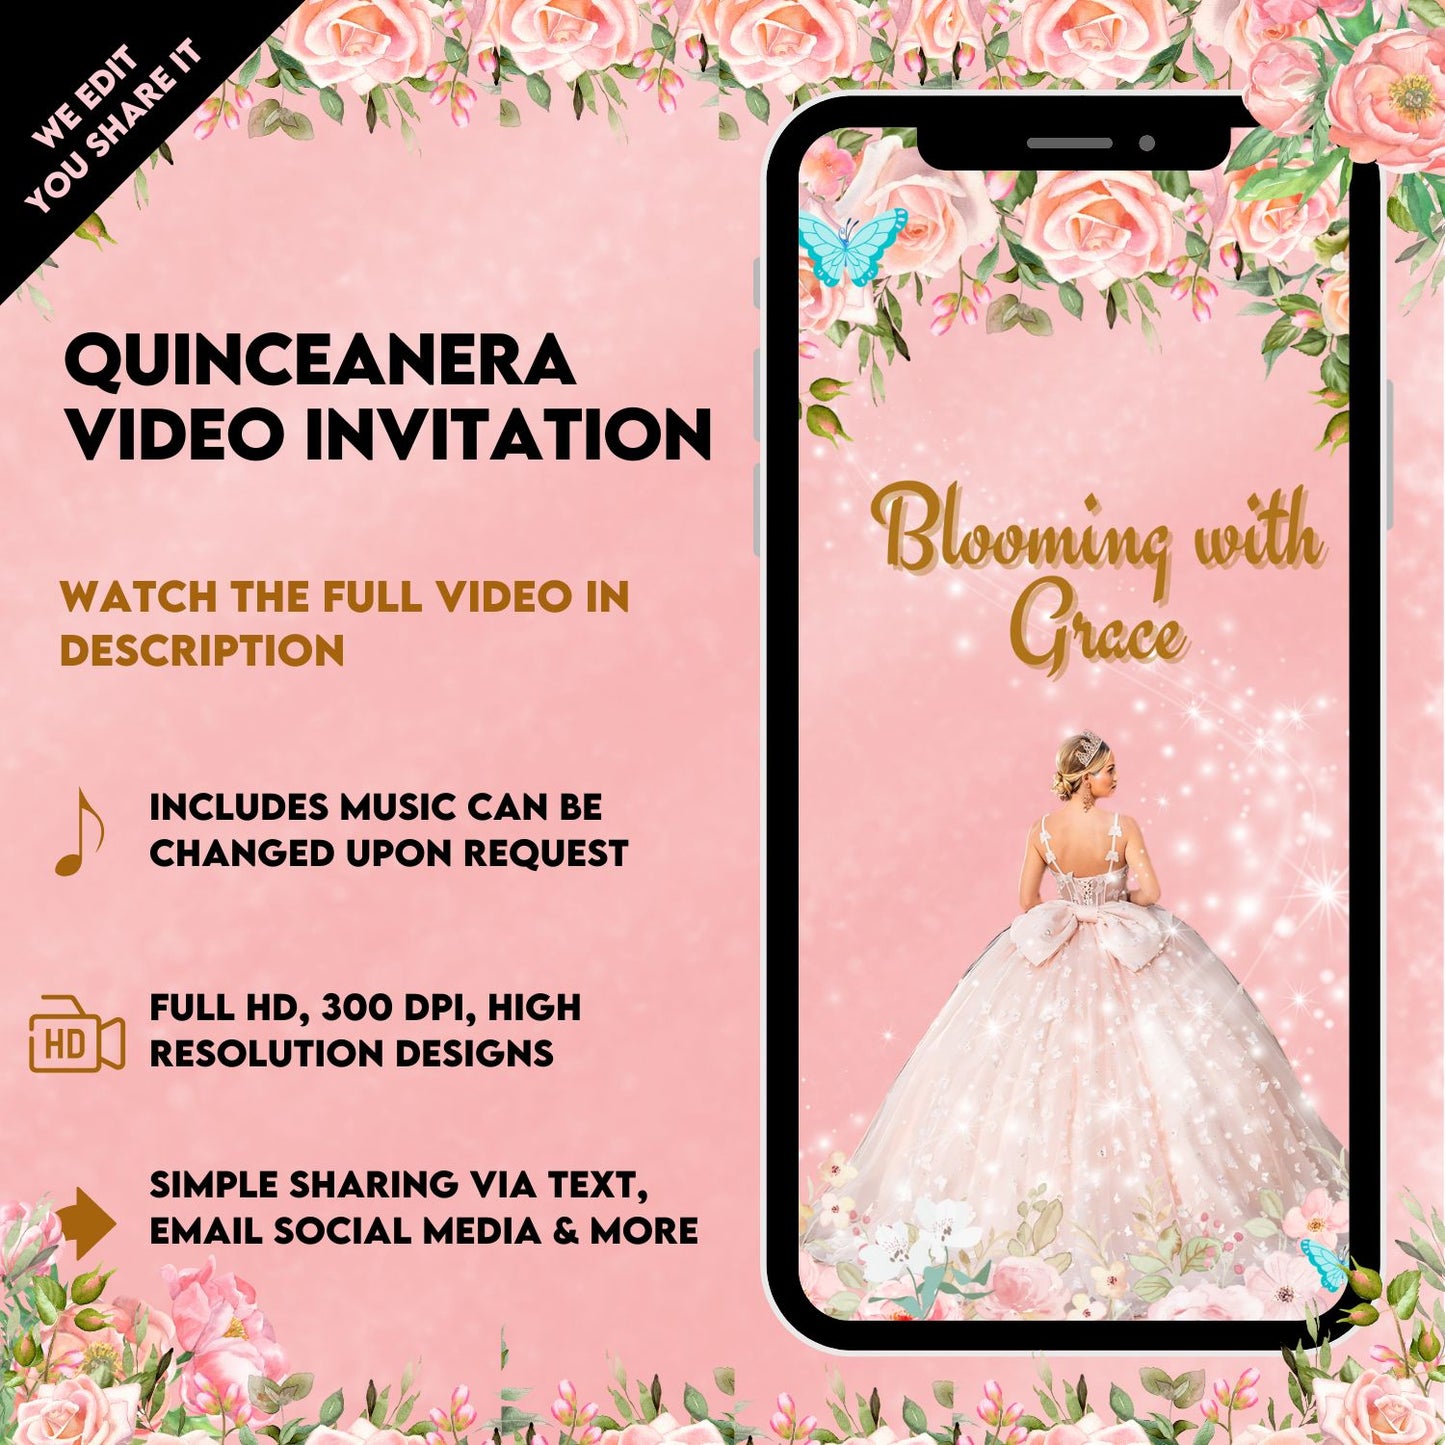 Quinceanera Video Invitation - Blush Pink Flowers & Butterfly Animated Quinceanera Theme Invite